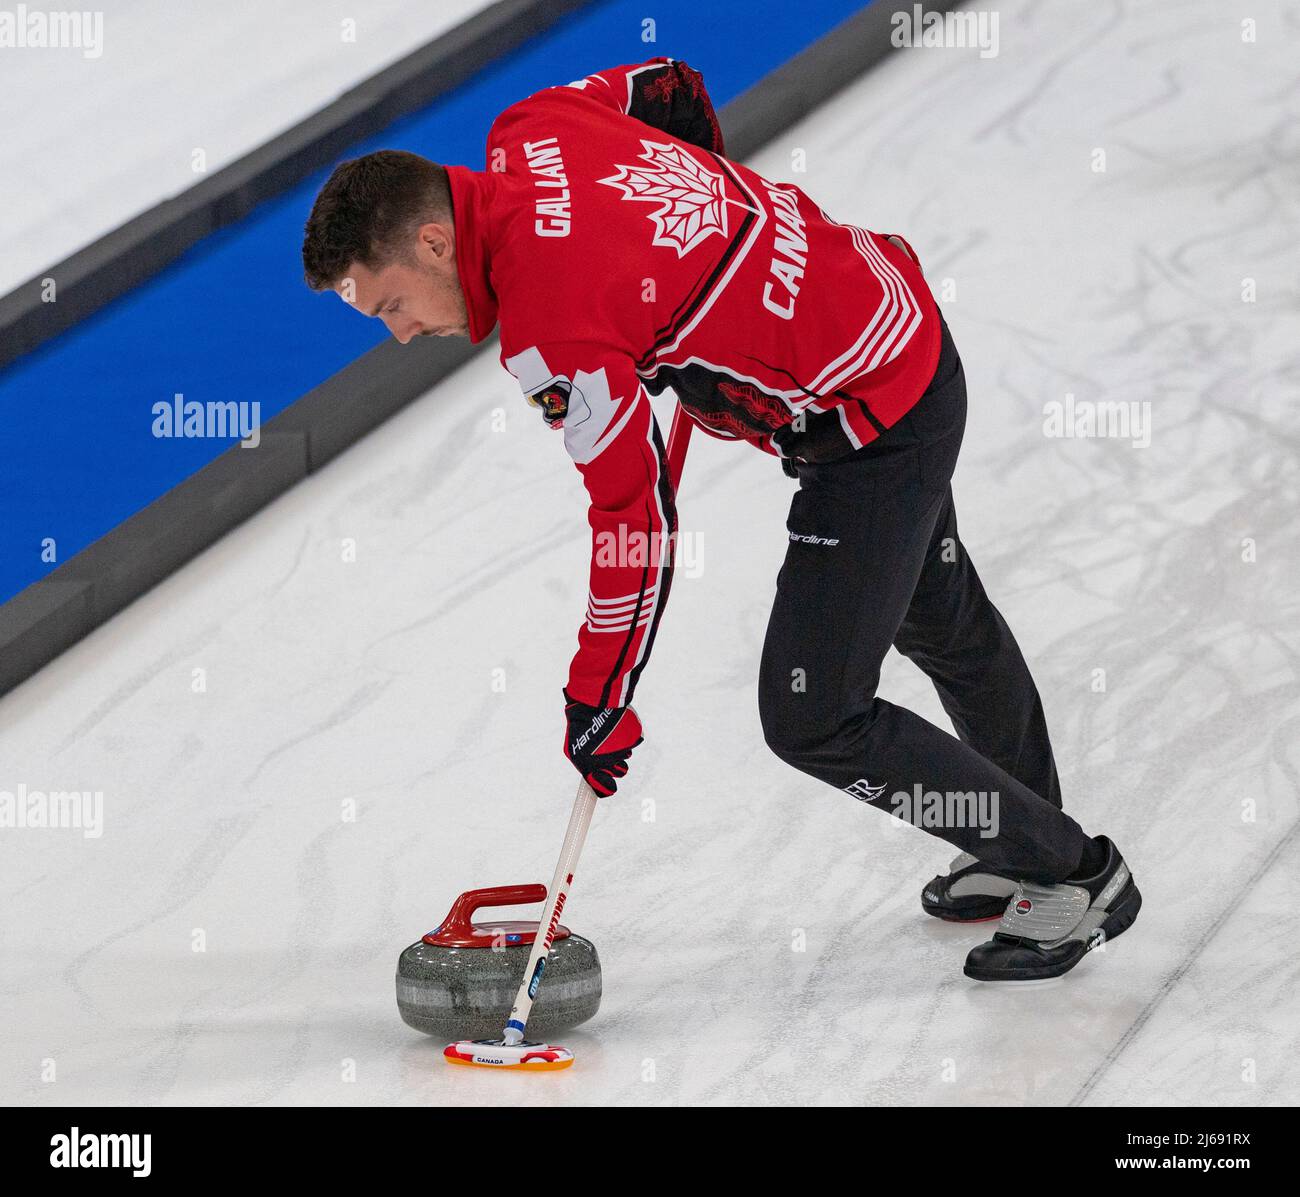 Geneva Switzerland, 29th April 2022:  Brett GALLANT of  Canada is in action during the World Mixed Doubles Curling Championship 2022. Credit. Eric Dubost/Alamy Live News. Stock Photo